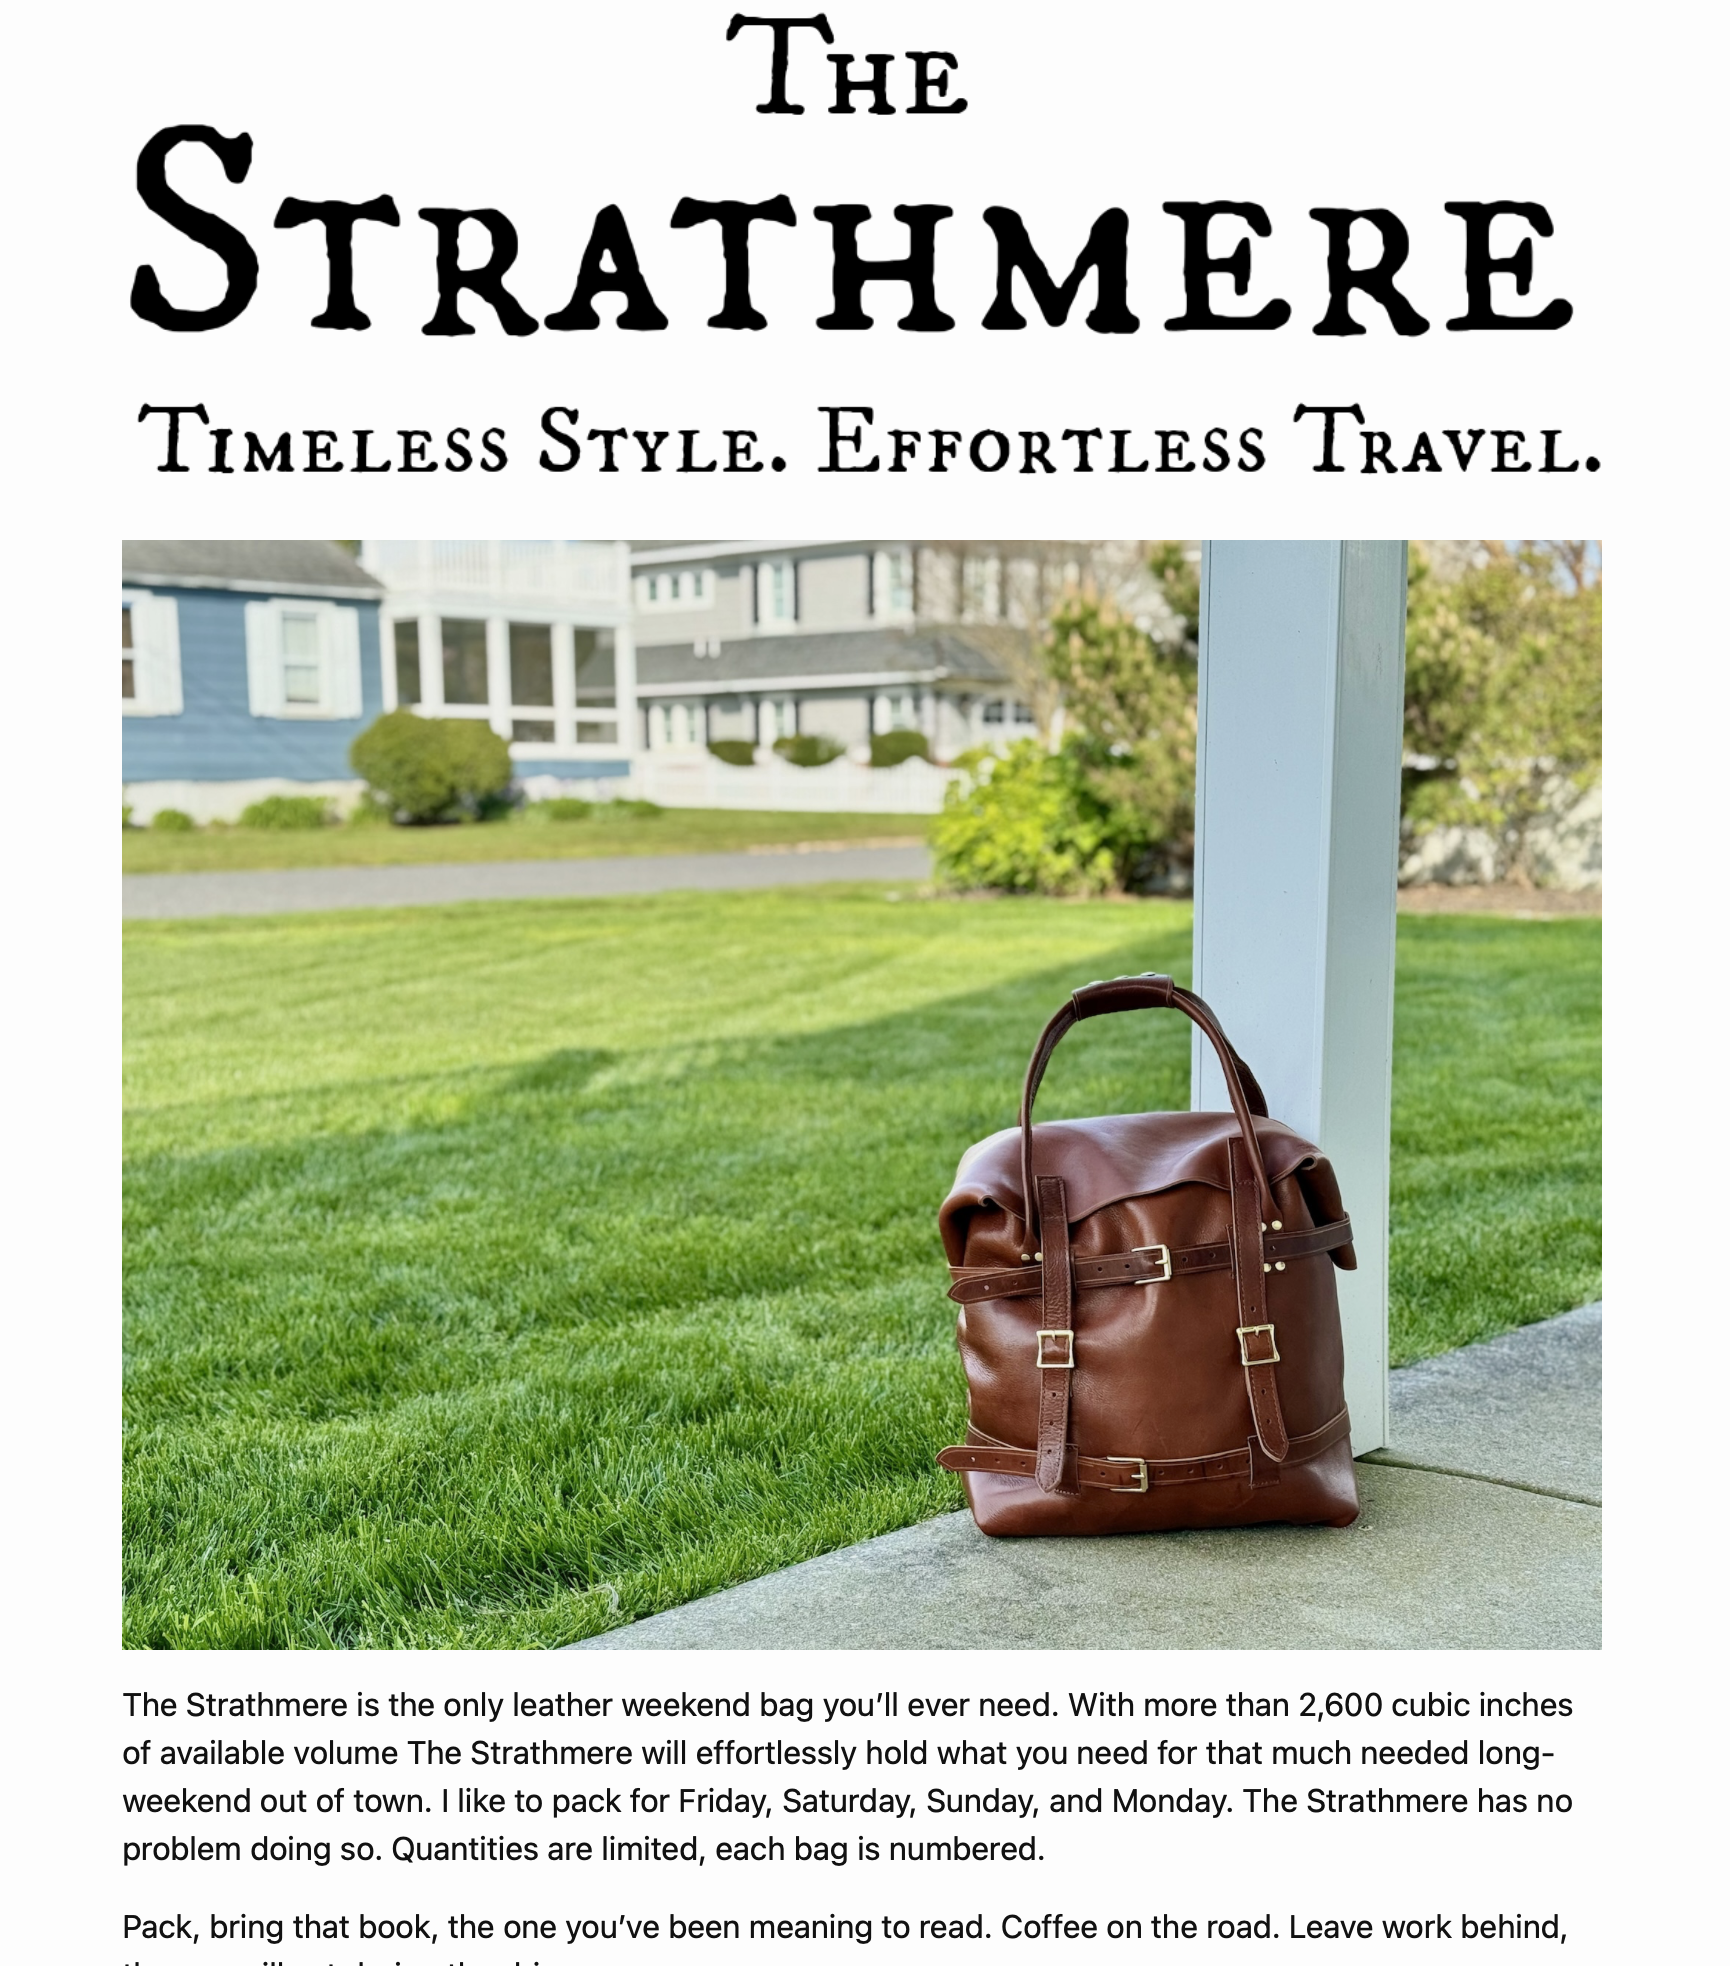 Screenshot of the in-progress landing page for The Strathmere leather weekend bag